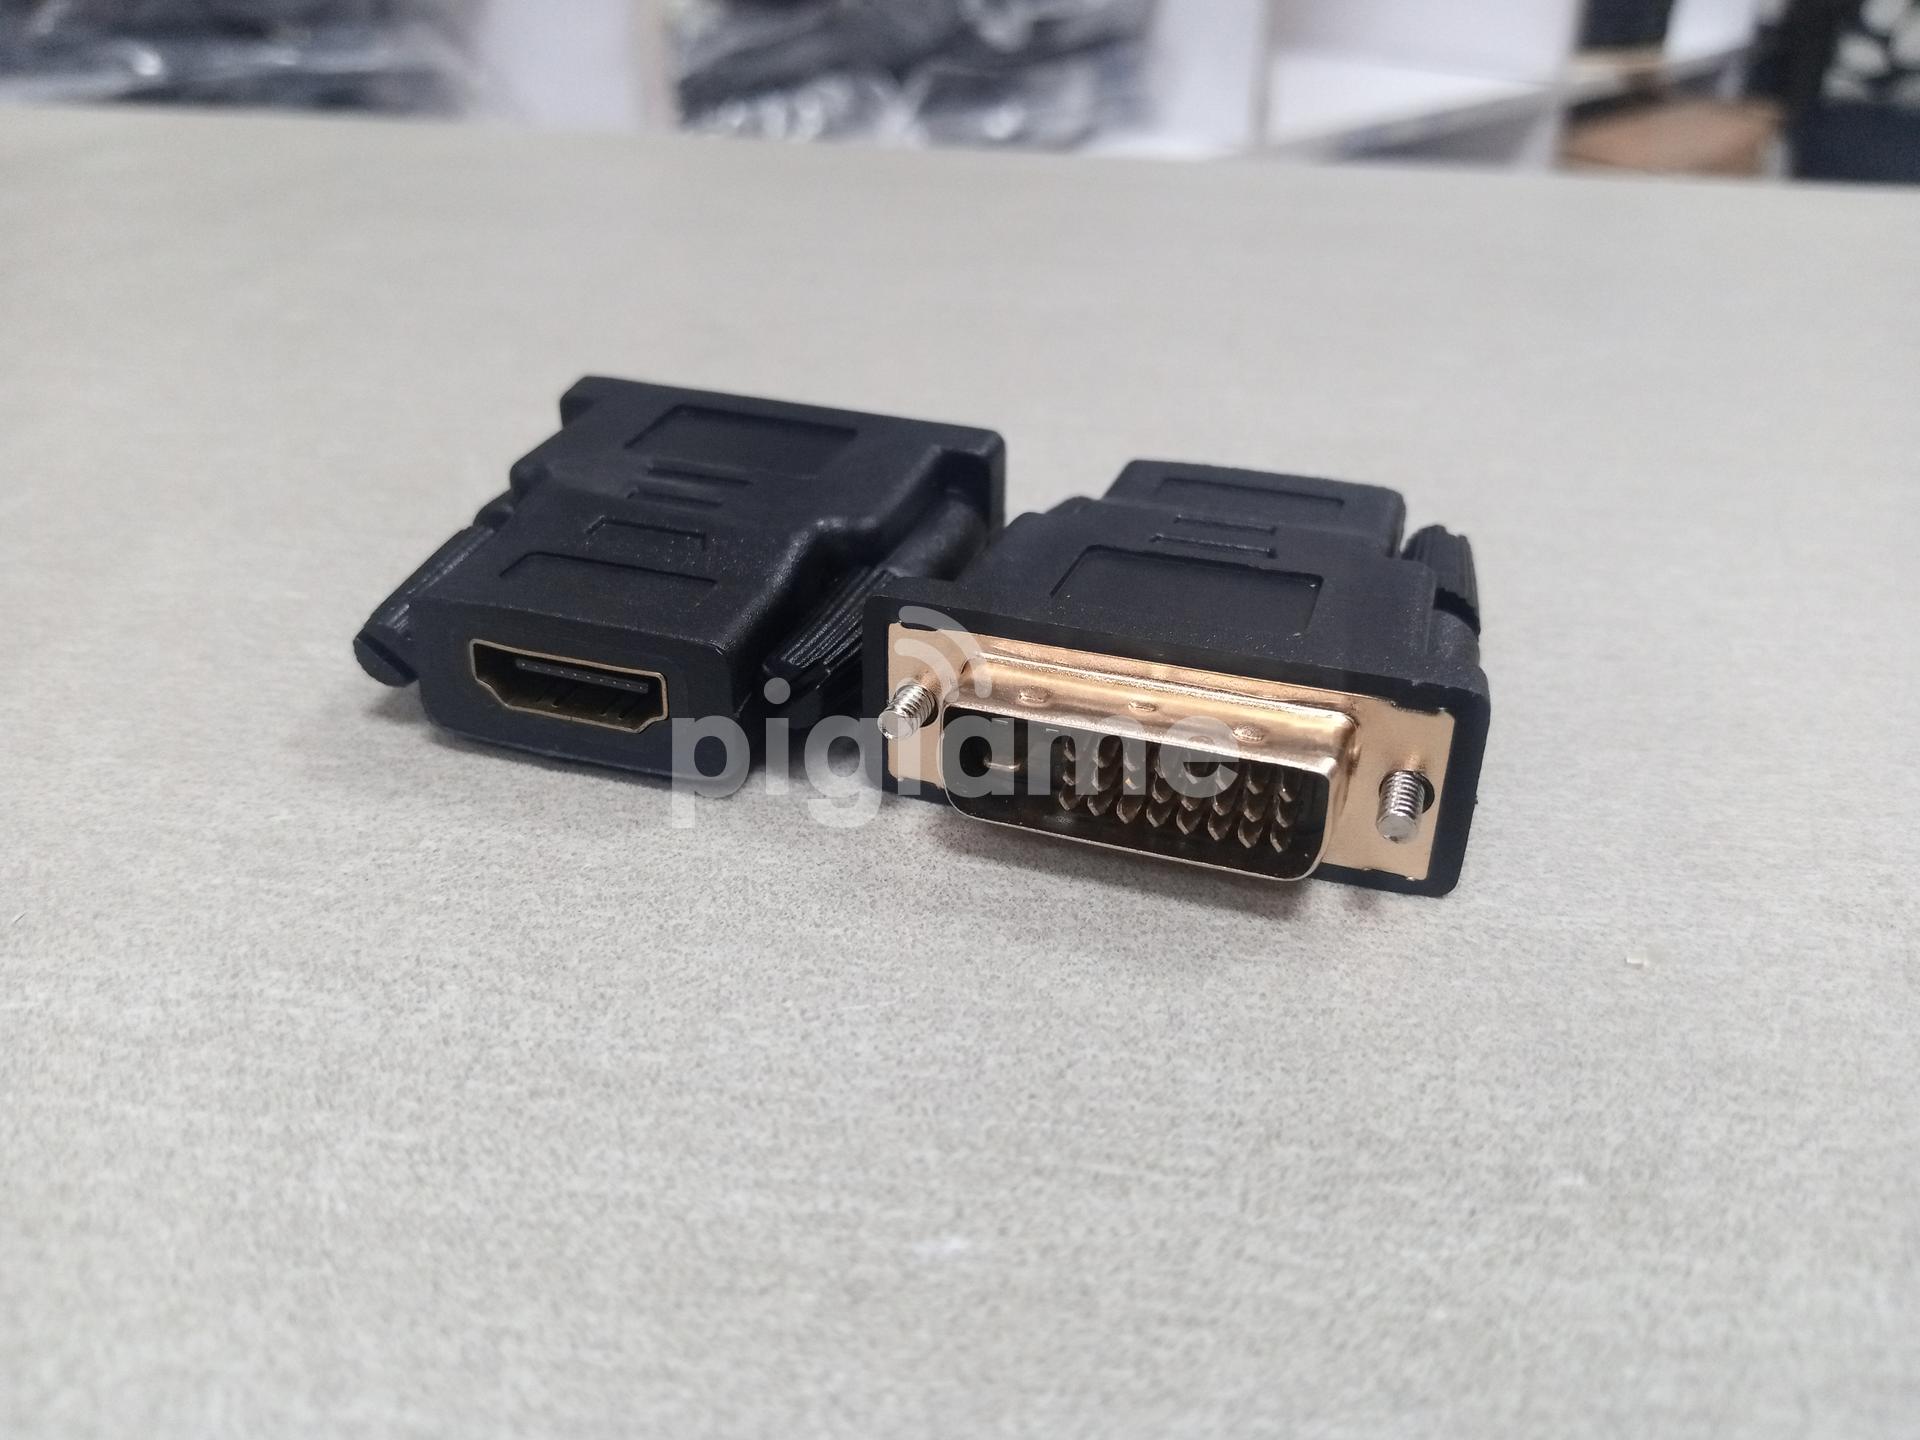 Vention DVI to HDMI Adapter Bi-directional DVI D 24+1 Male to HDMI Female